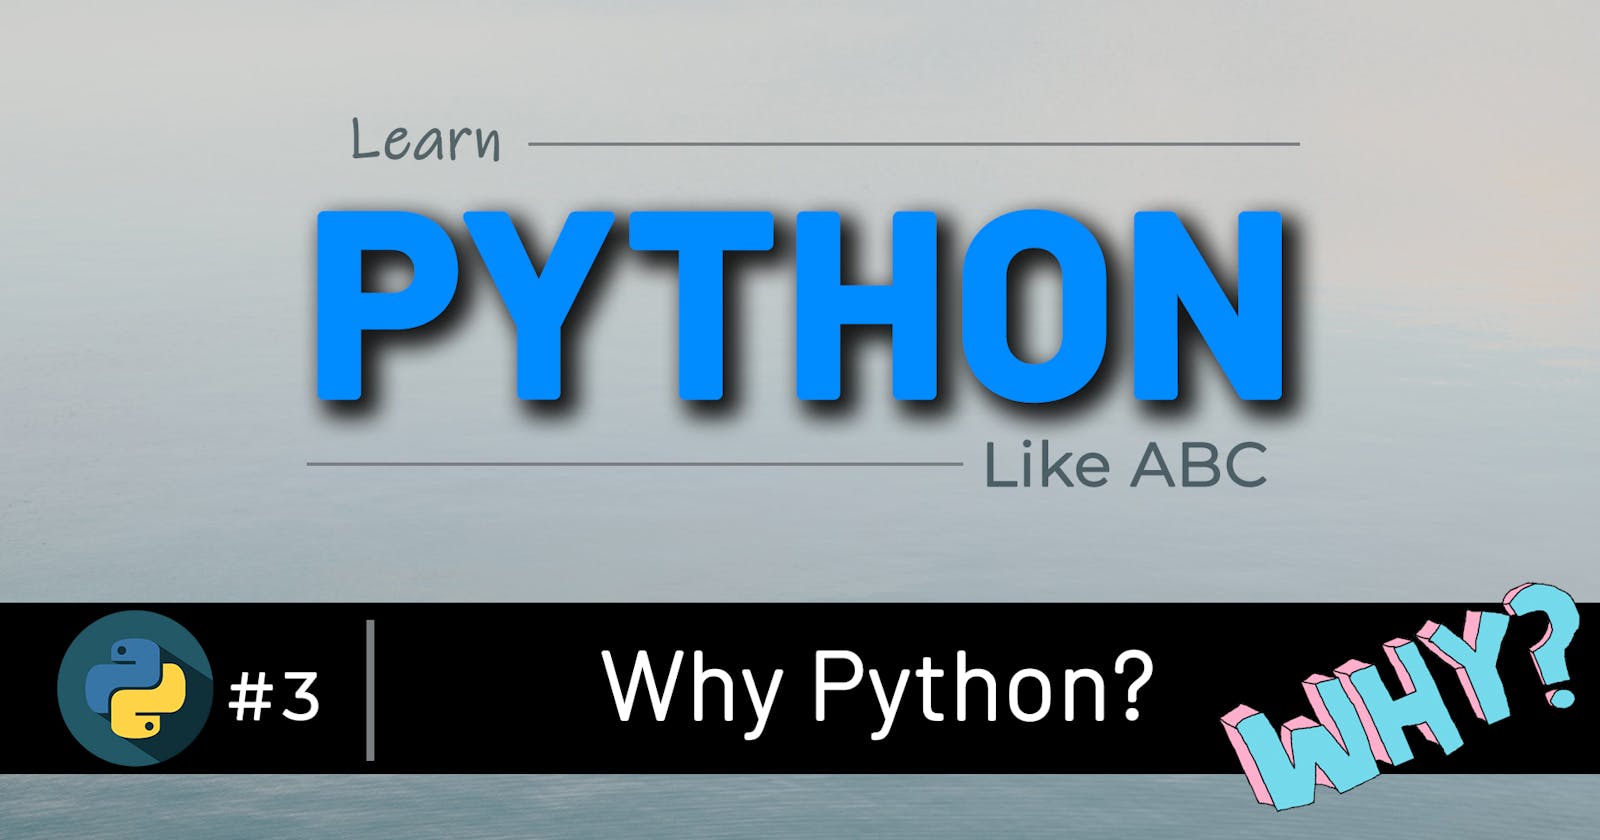 03 Why Python? Why not any other language? | Learn Python Like ABC